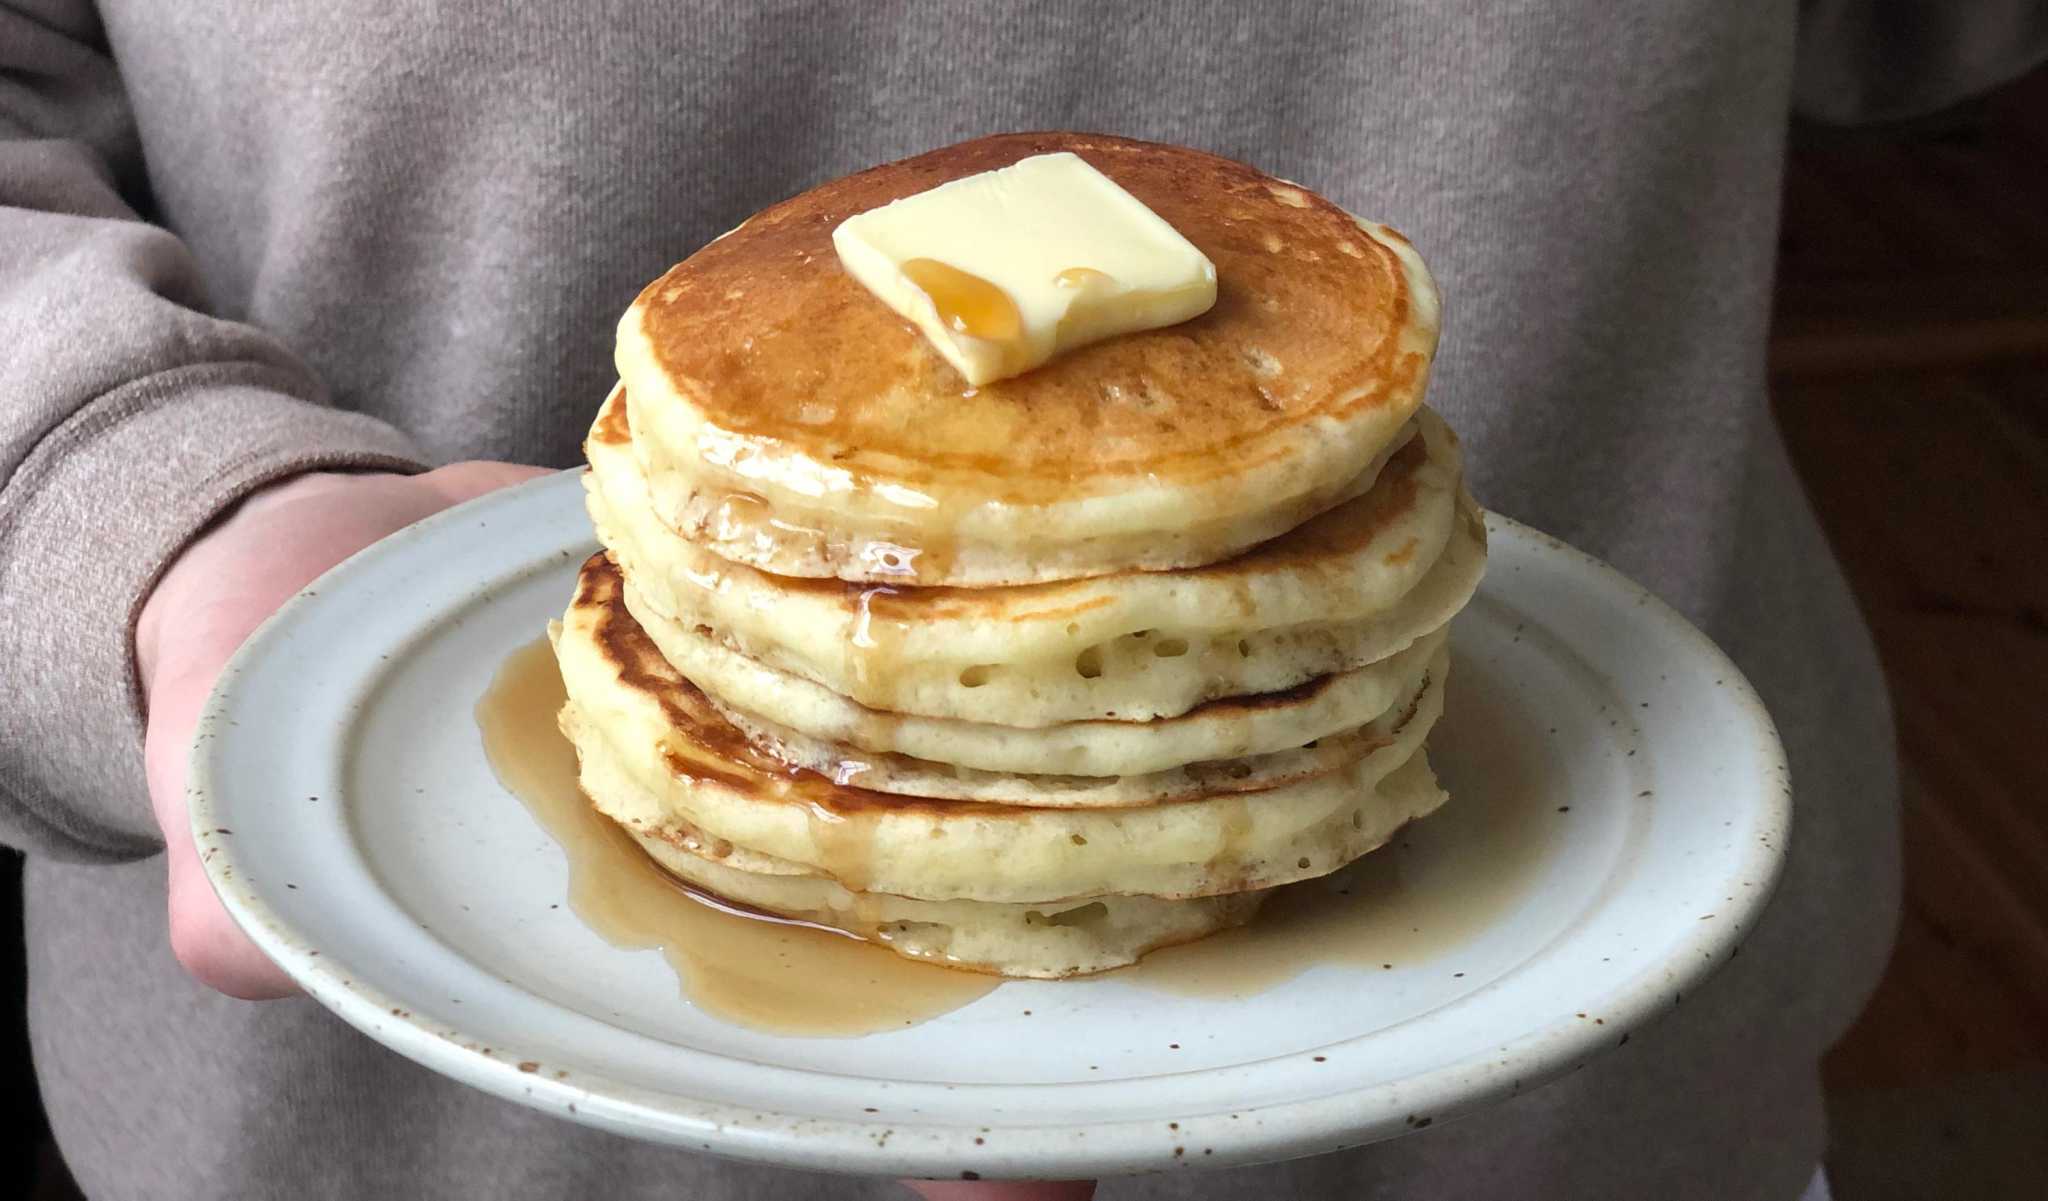 There are a million pancake recipes out there, but this light, creation is one you'll return to